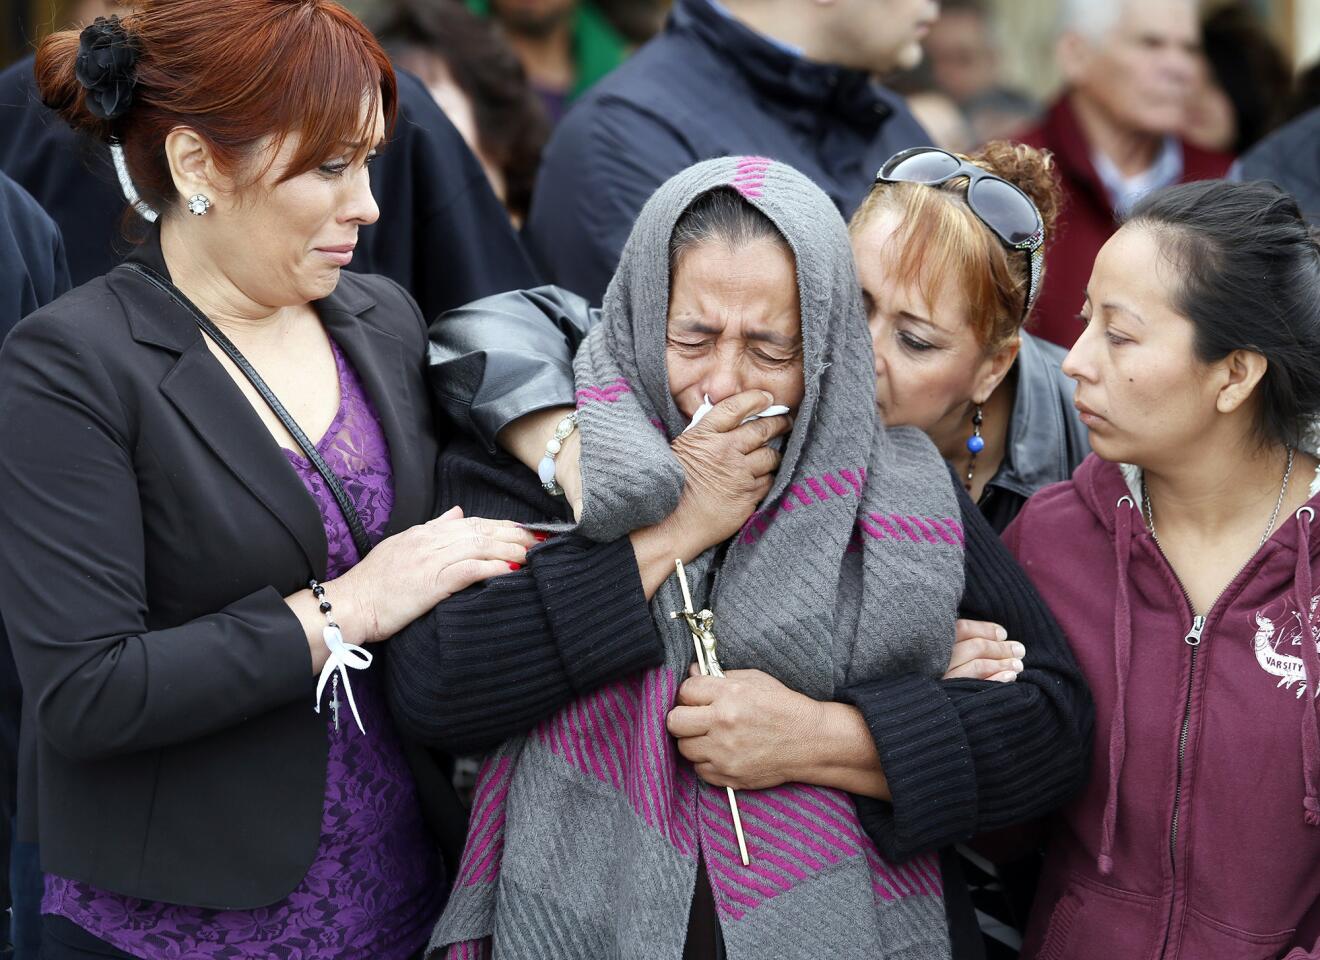 Agapita Montes Rivera is comforted after the funeral for her son, Antonio Zambano Montes, in Pasco, Wash. His shooting death by police has sparked protests and calls for a federal investigation.